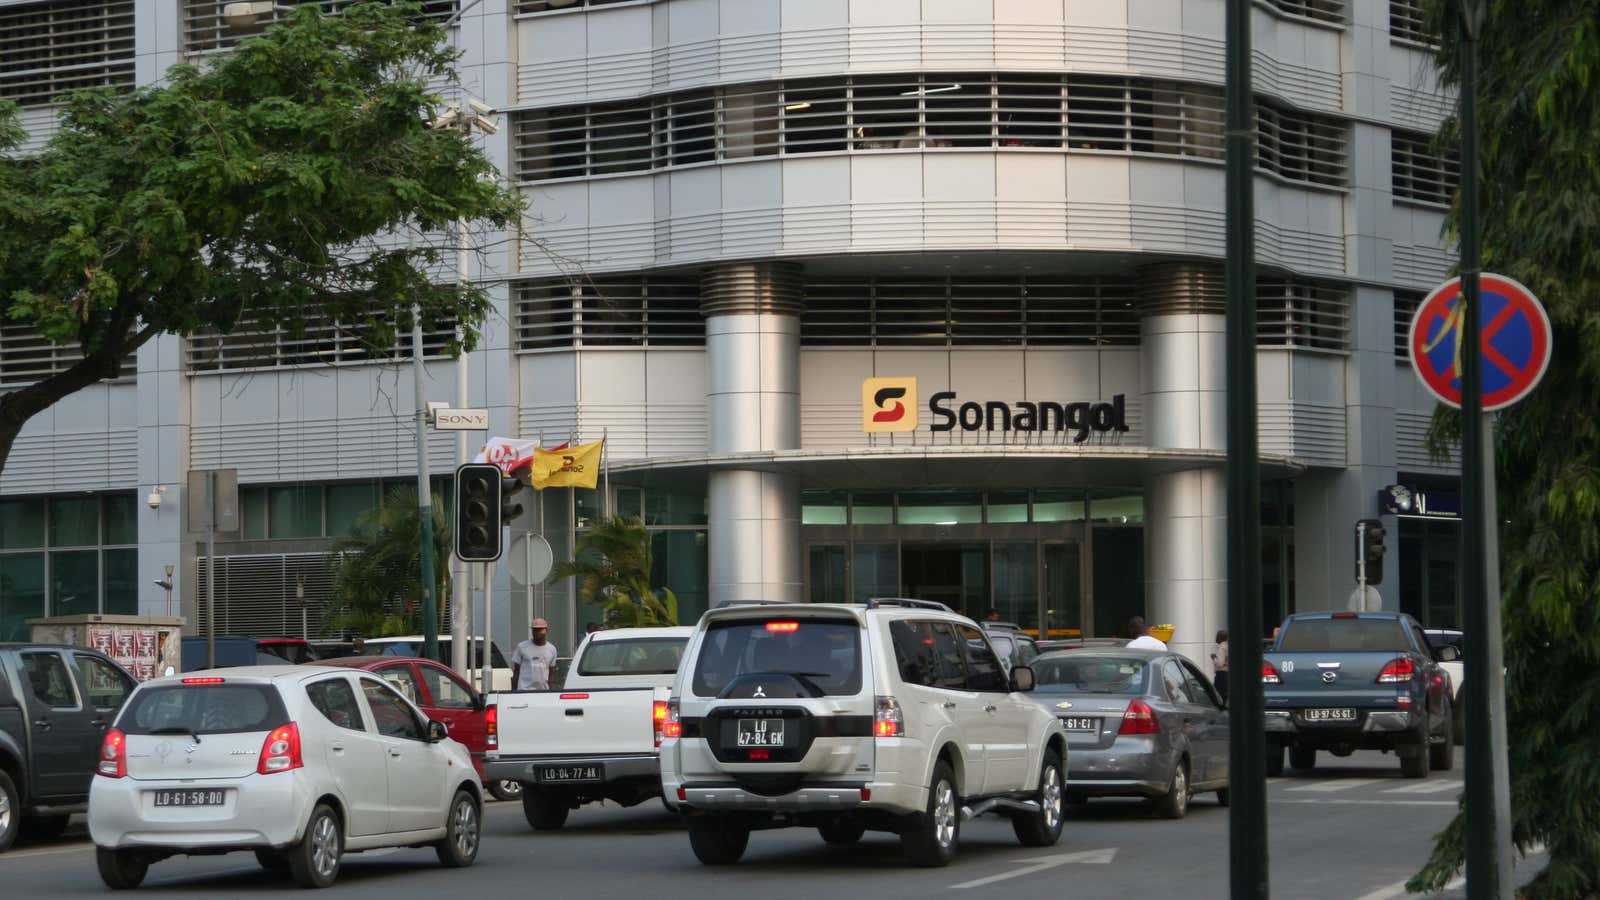 Angola’s state oil firm Sonangol is a major exporter to China